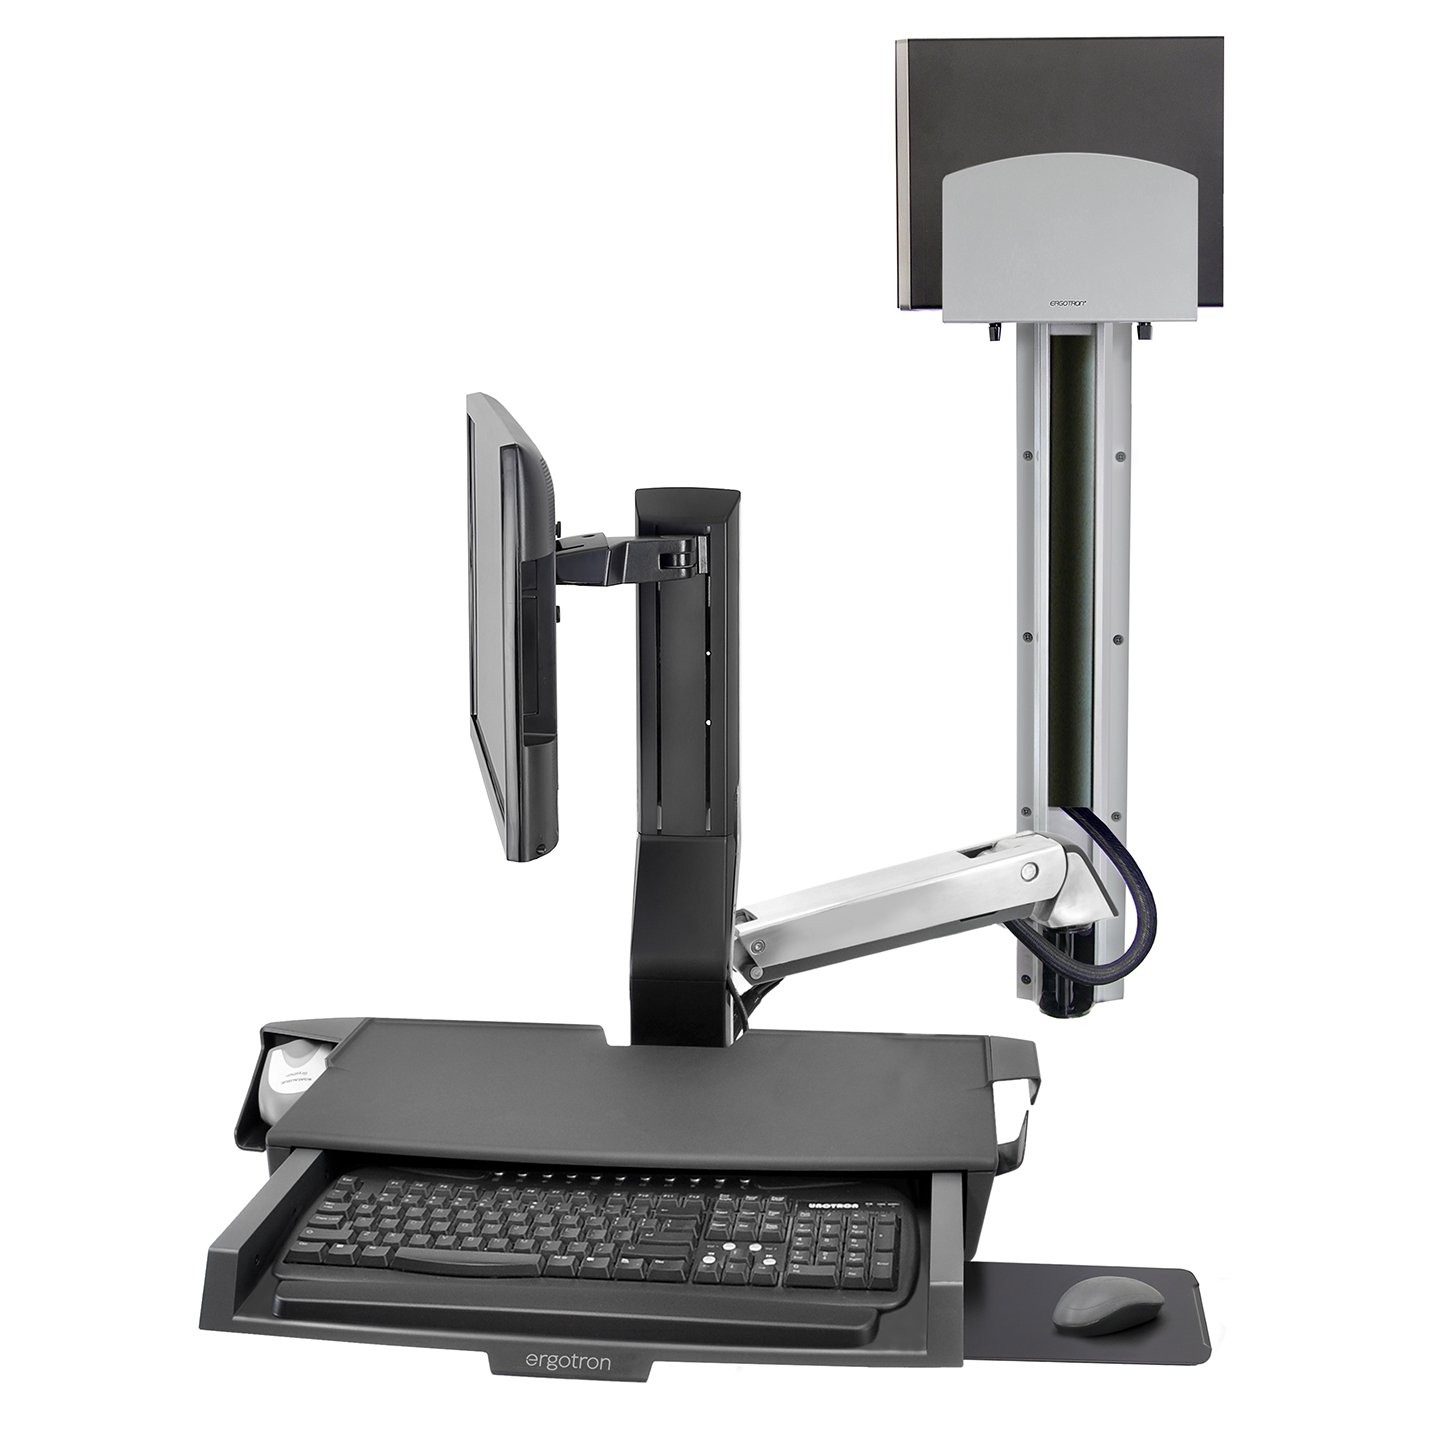 Haworth StyleView Sit to Stand Workspace with metal arms being extended